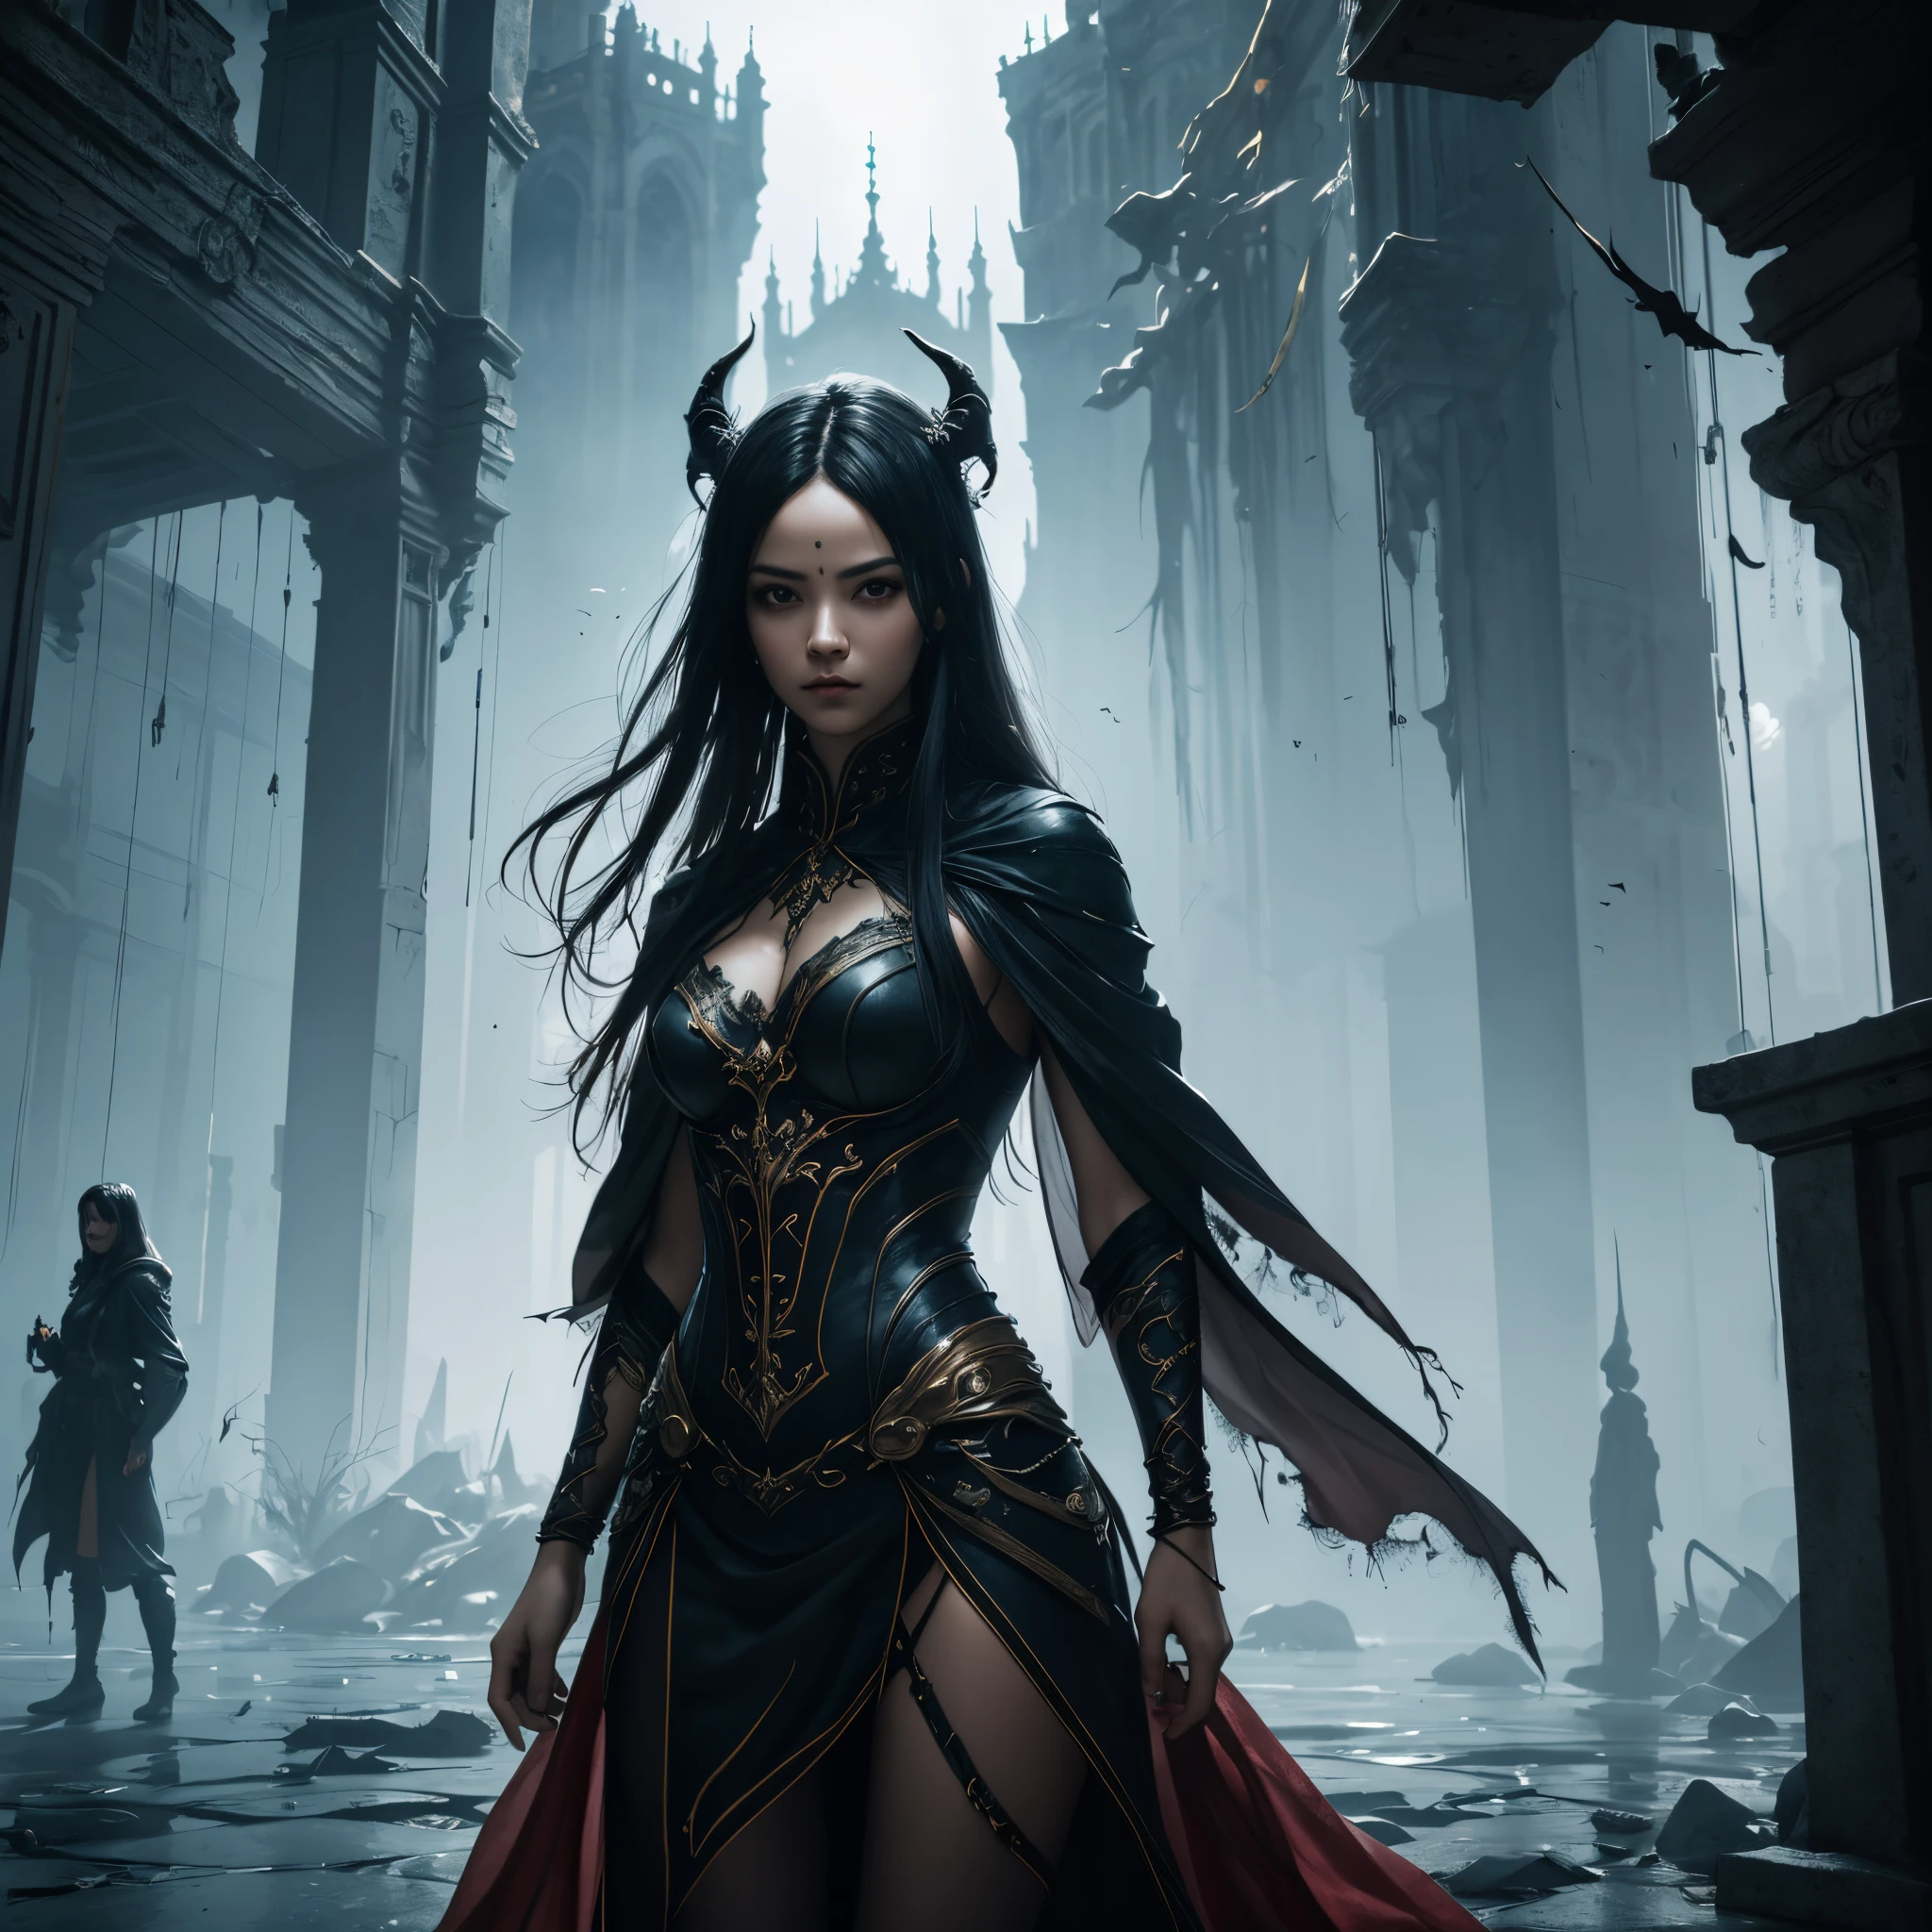 A woman wearing a red dress and cloak, There are long horns on the head, blonde with blue eyes，a woman vampire，sorceress woman，Stand in front of an old castle. tears in her eyes. Artwork rendered in low poly style by John La Gatta. It captures emerging trends in the CG world, A combination of fantasy and art. The overall scene has a dark world atmosphere, Fight against multiple factions, Vampire  one of them. Emphasized by using sublime lighting techniques. A woman’s eyes and face are extremely detailed, Highlight the charming eyes of death. She exudes mystery and aura, Her lips are beautifully painted. Her appearance  both captivating and disturbing. She exudes strength and dominance, Show her confident attitude. The castle behind her looks intricate, Capturing its ancient and ominous essence. The environment exudes a mysterious atmosphere, Enhance the atmospheric quality of images. This  a masterpiece，Demonstrate the incredible level of detail achieved through 3D rendering. The use of ultra-fine painting techniques and physically based rendering further enhances the realism of the images. The colors used are lively and lively, Capture the intensity of a scene. In terms of artistic style, The image combines elements of modern fantasy. it embraces the dark and supernatural, a feeling of unease and curiosity. Stable diffusion will produce visually stunning images，A powerful and mysterious woman stands in front of an ancient castle, evoke a sense of mystery, dream-like, and darkness.